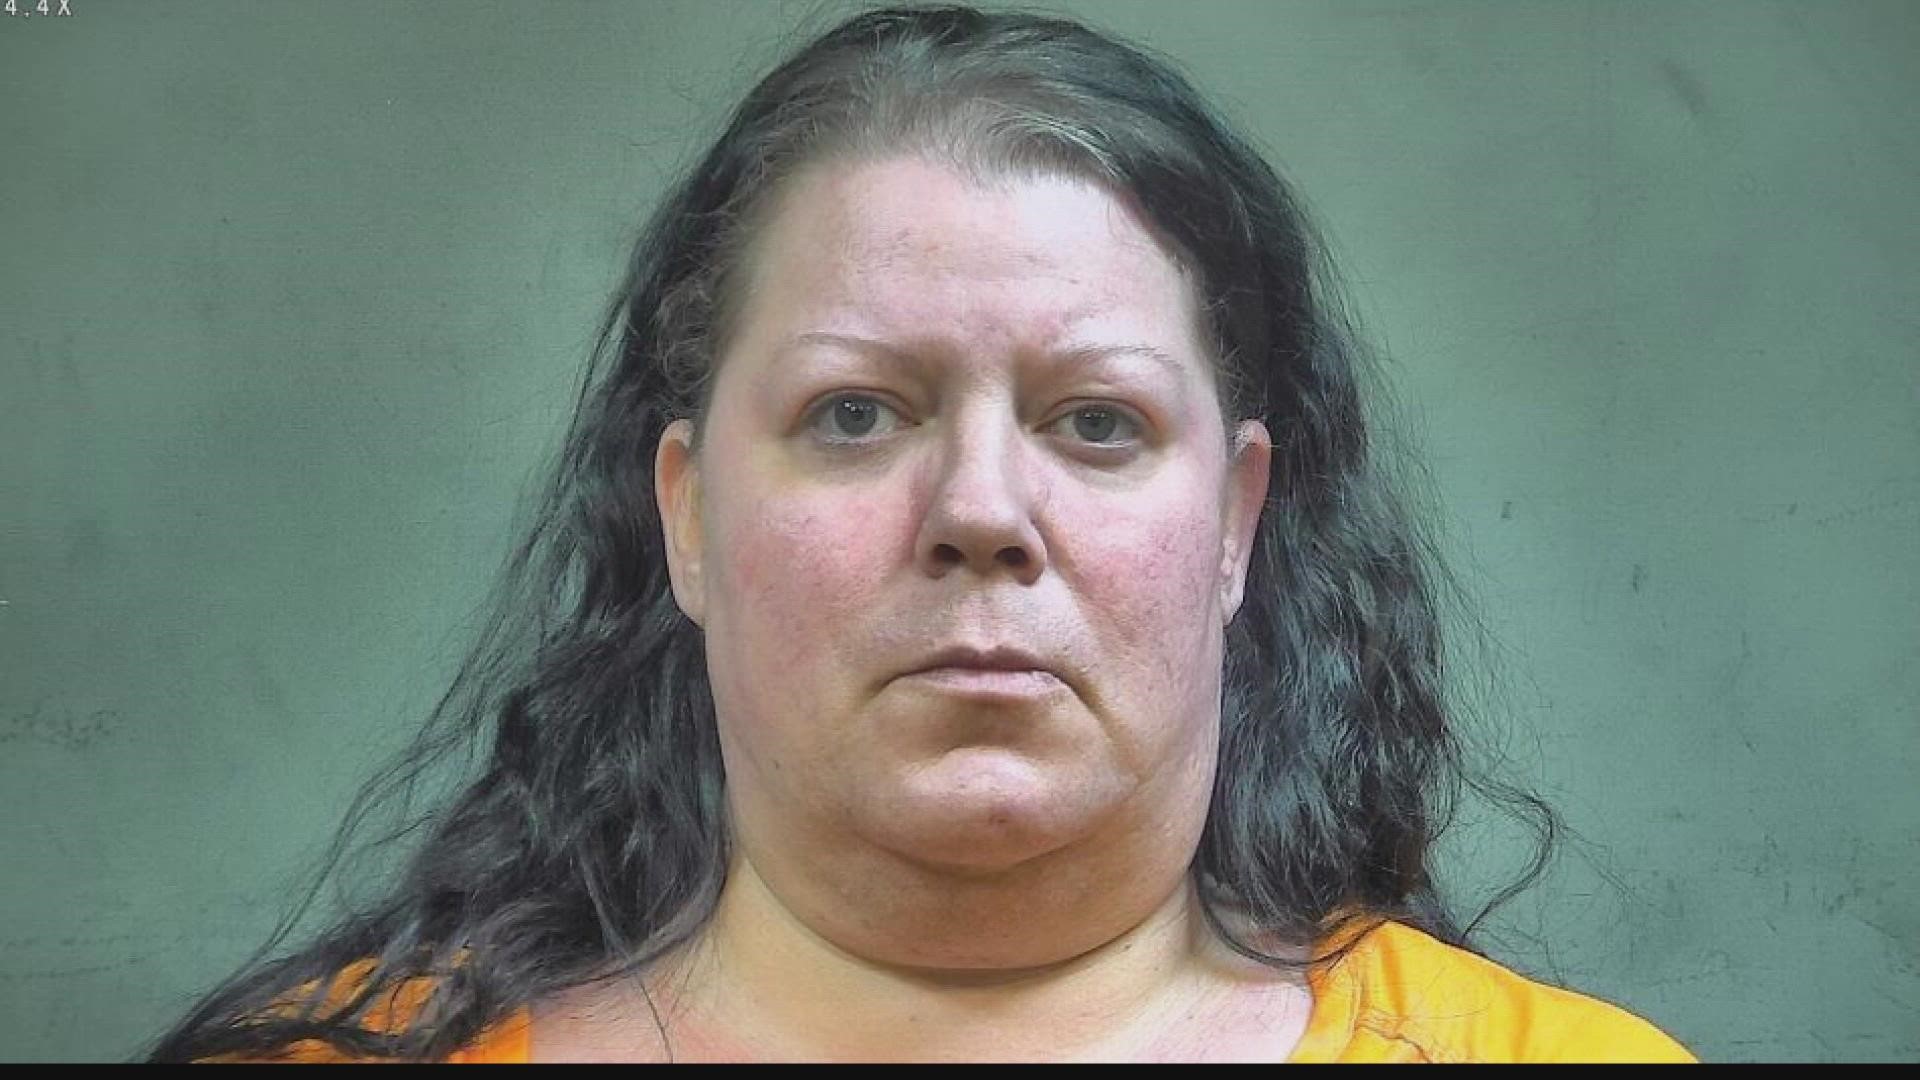 Prosecutors say Alicia Kay Duff bought the gun and ammunition used to kill 3 people in a Lebanon apartment in September of 2021.